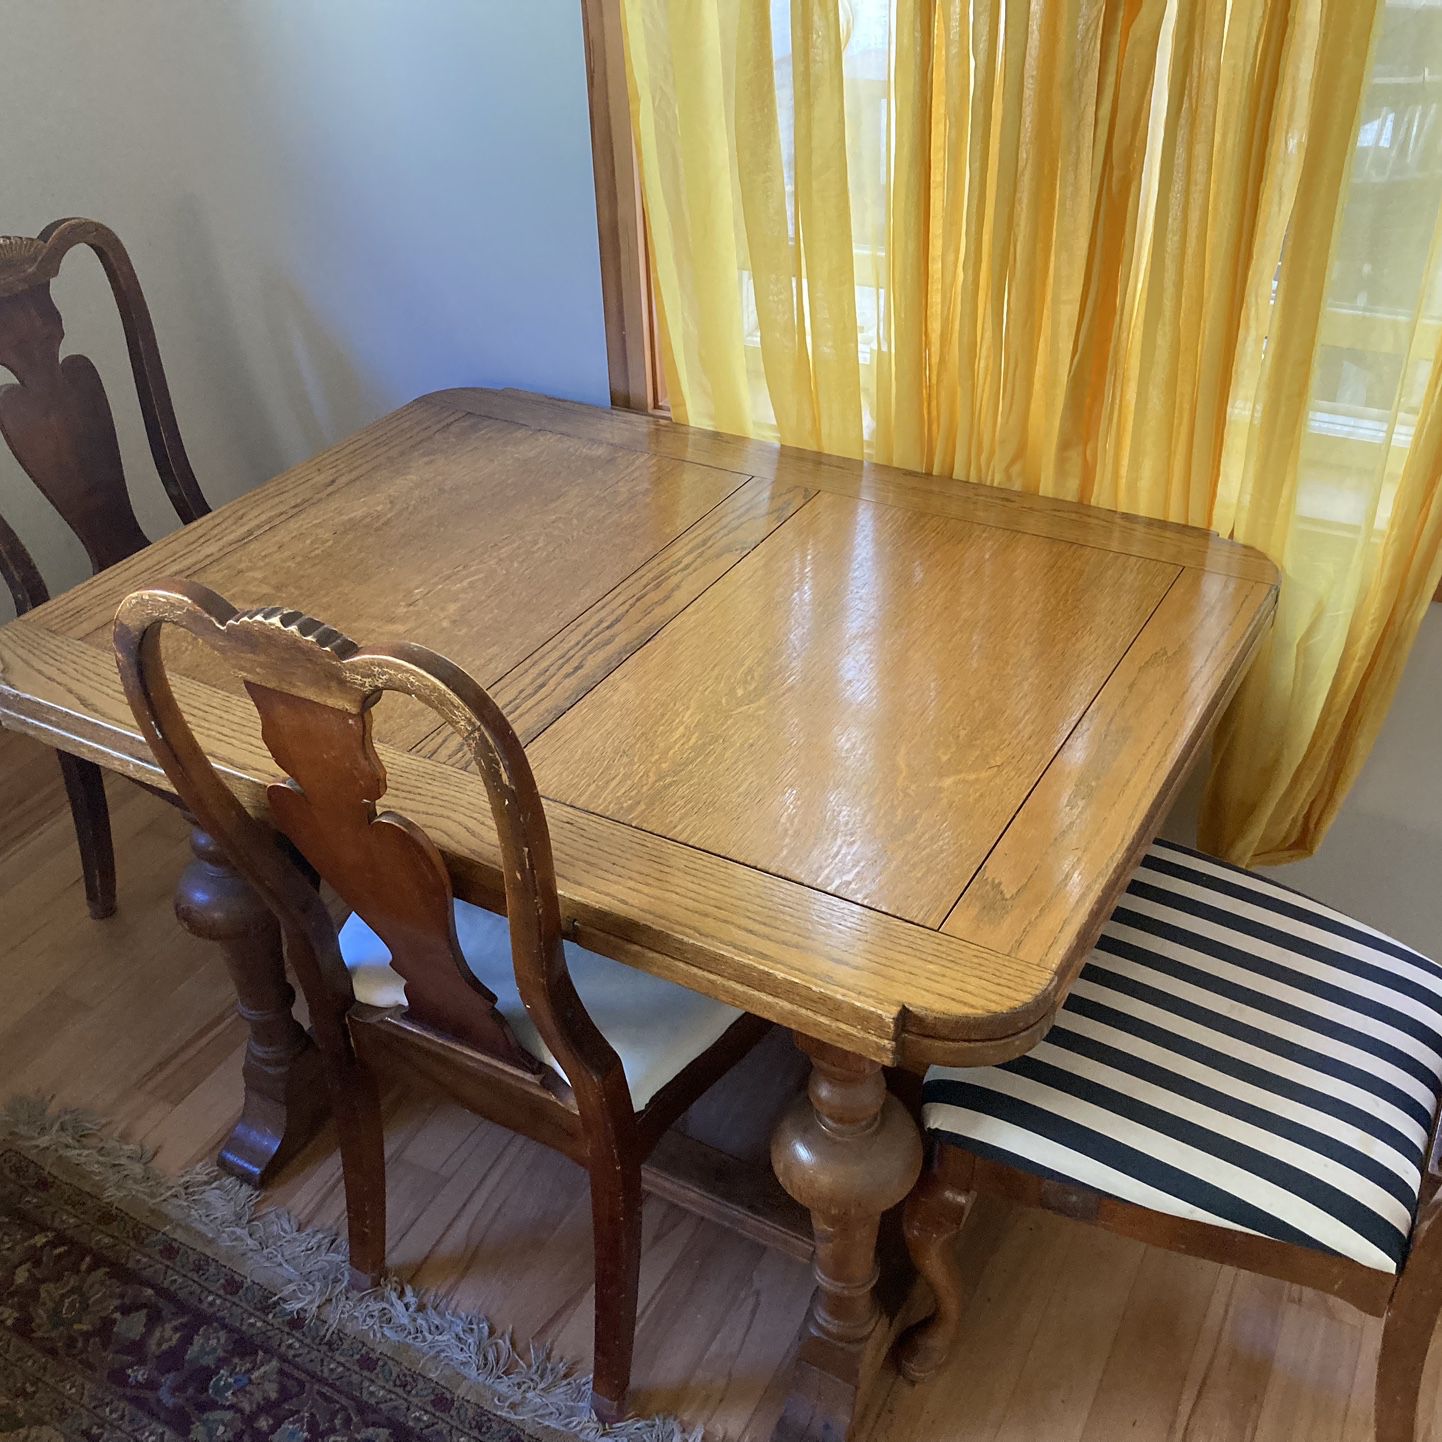 wood dining table with chairs